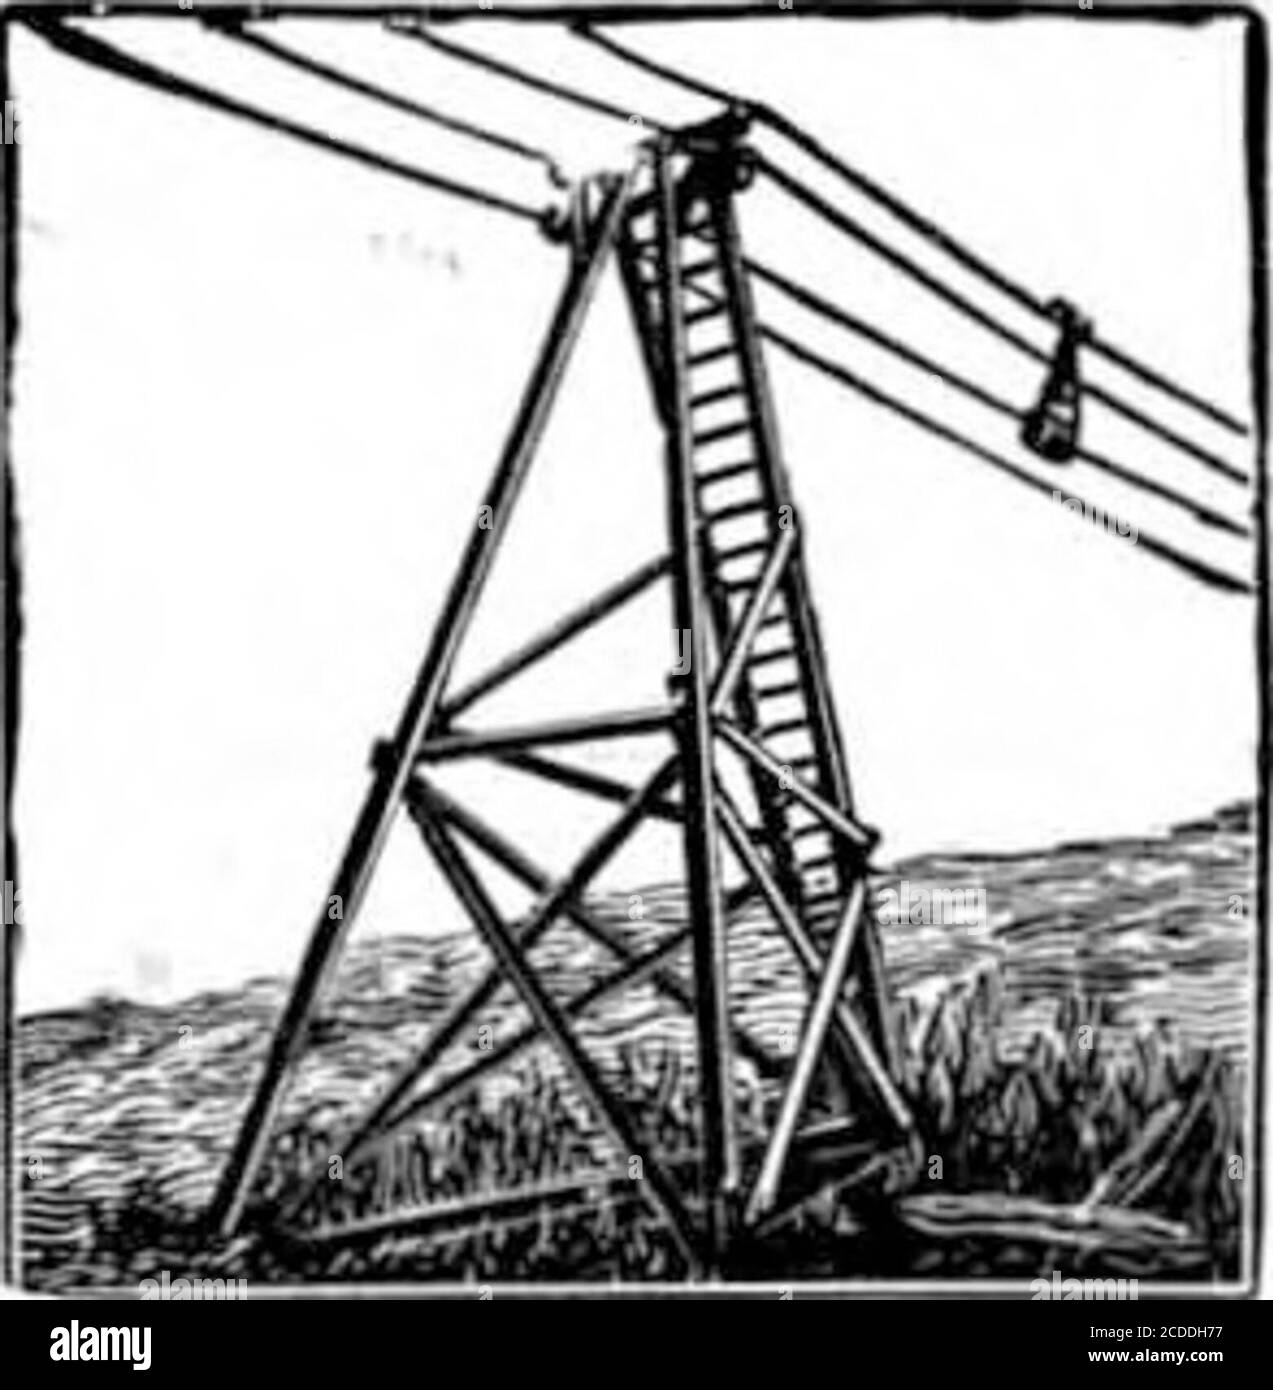 . Scientific American Volume 86 Number 14 (April 1902) . 2d Hand Automobiles PARTS AND SUPPLIES Send Stamp for Catalogue A. L.. DYKE, St. Louis, Mo. N?1I clintonst brooklyn:nv. PATENT AERIAL WIRE ROPE TRAMWAY* ^HERCULES VVIR.E.ROPE- ?;... .; For Transportation of Ore, Coal. Dirt, Timber, etc. r (Trade Mark Registered.) Perfect Grip Clip. Absolutely Safe. Loads Automatically. Unloads Automatically.Operated by One Man. Cost of Maintenance Low. Capacity Largest Obtainable. A. LESCHEN & SONS ROPE COMPANY, hVSWSZ&B&VSo. (92 Centre Street, New York City, N. Y.Branch Offices, &lt;137 E. Lake Street. Stock Photo